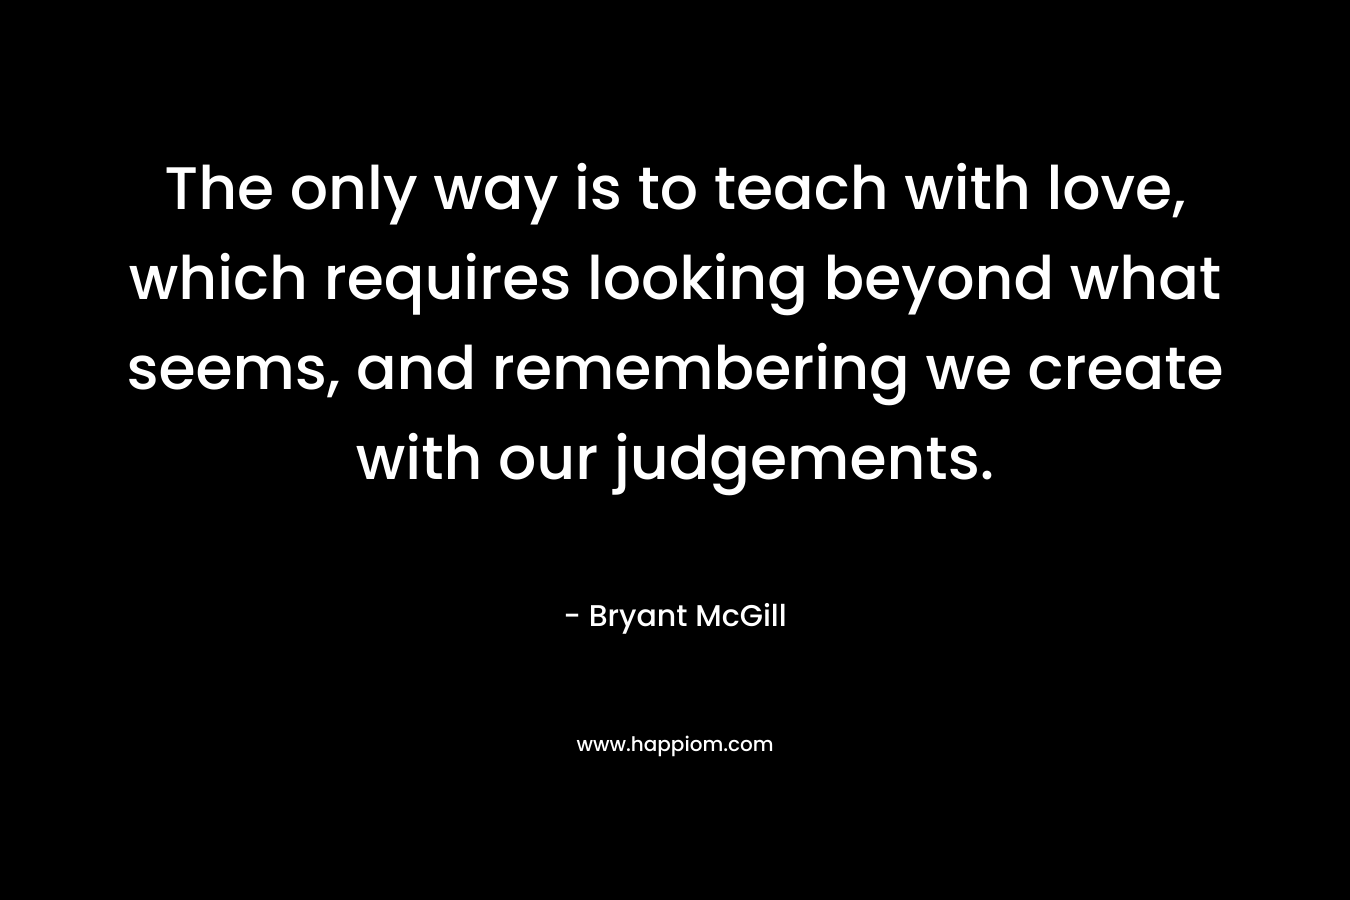 The only way is to teach with love, which requires looking beyond what seems, and remembering we create with our judgements. – Bryant McGill